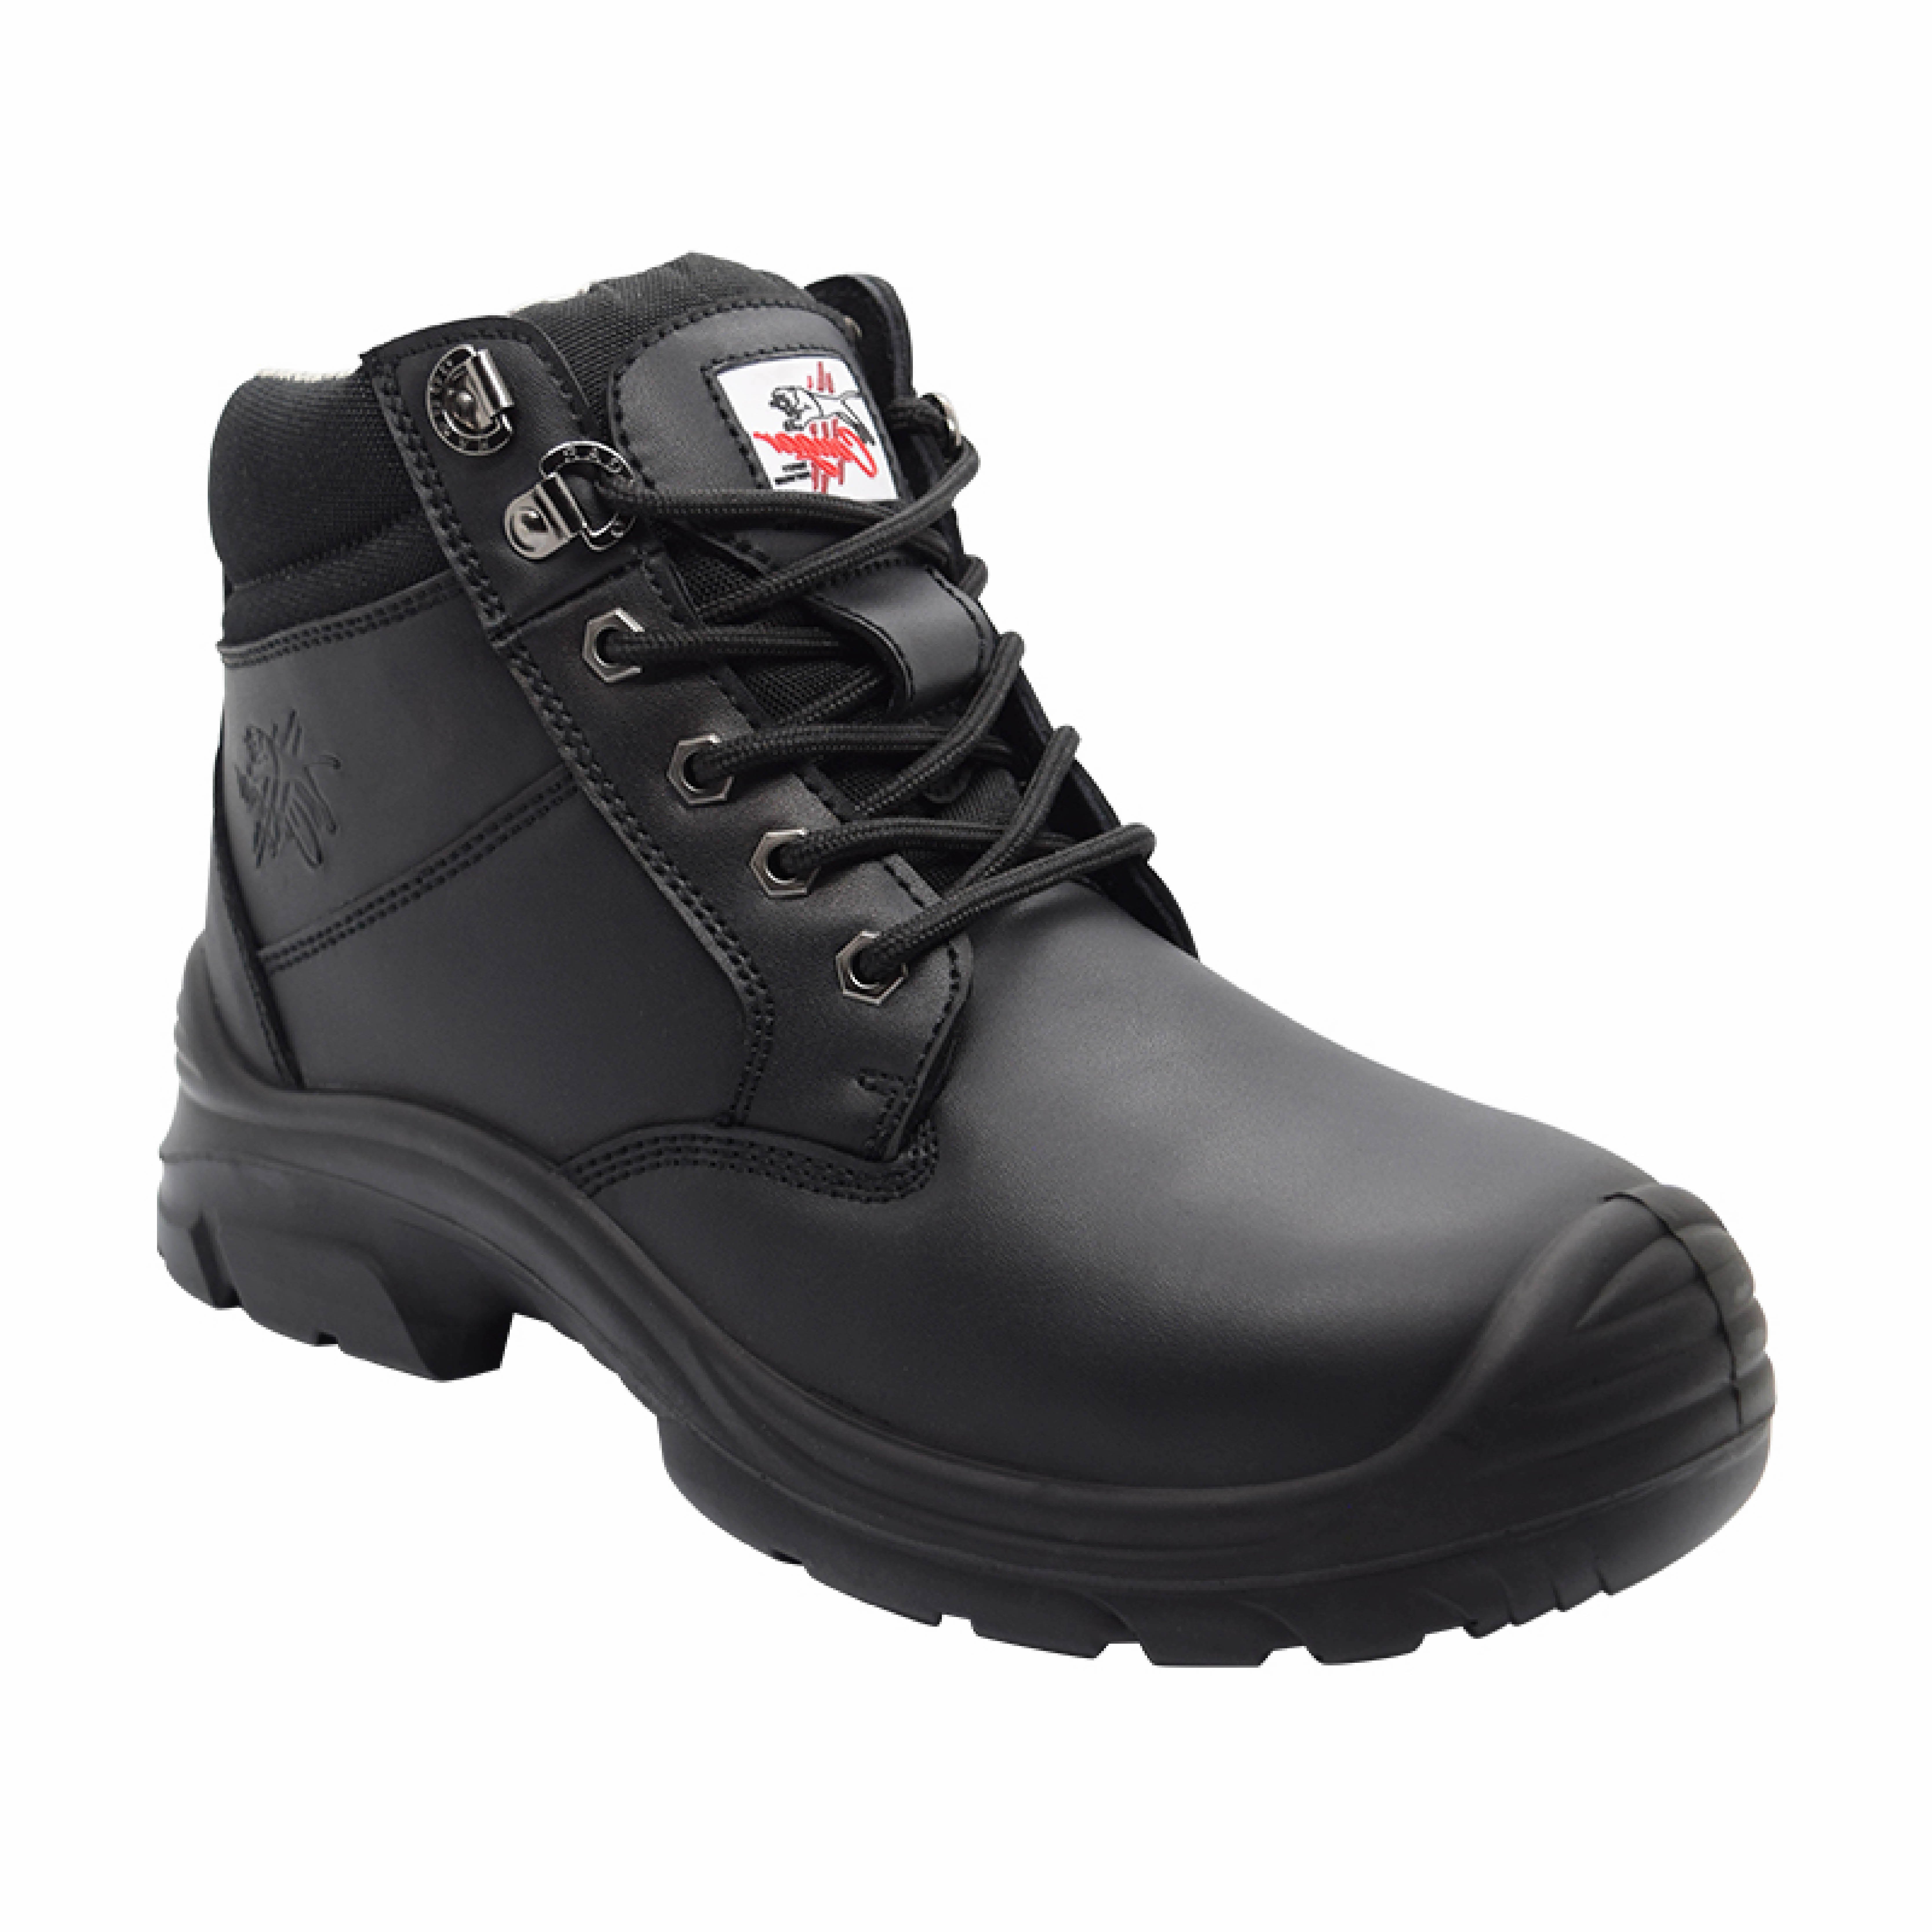 Lace Up Safety Boots with Safety Toe Black Size 12 (1 pair)